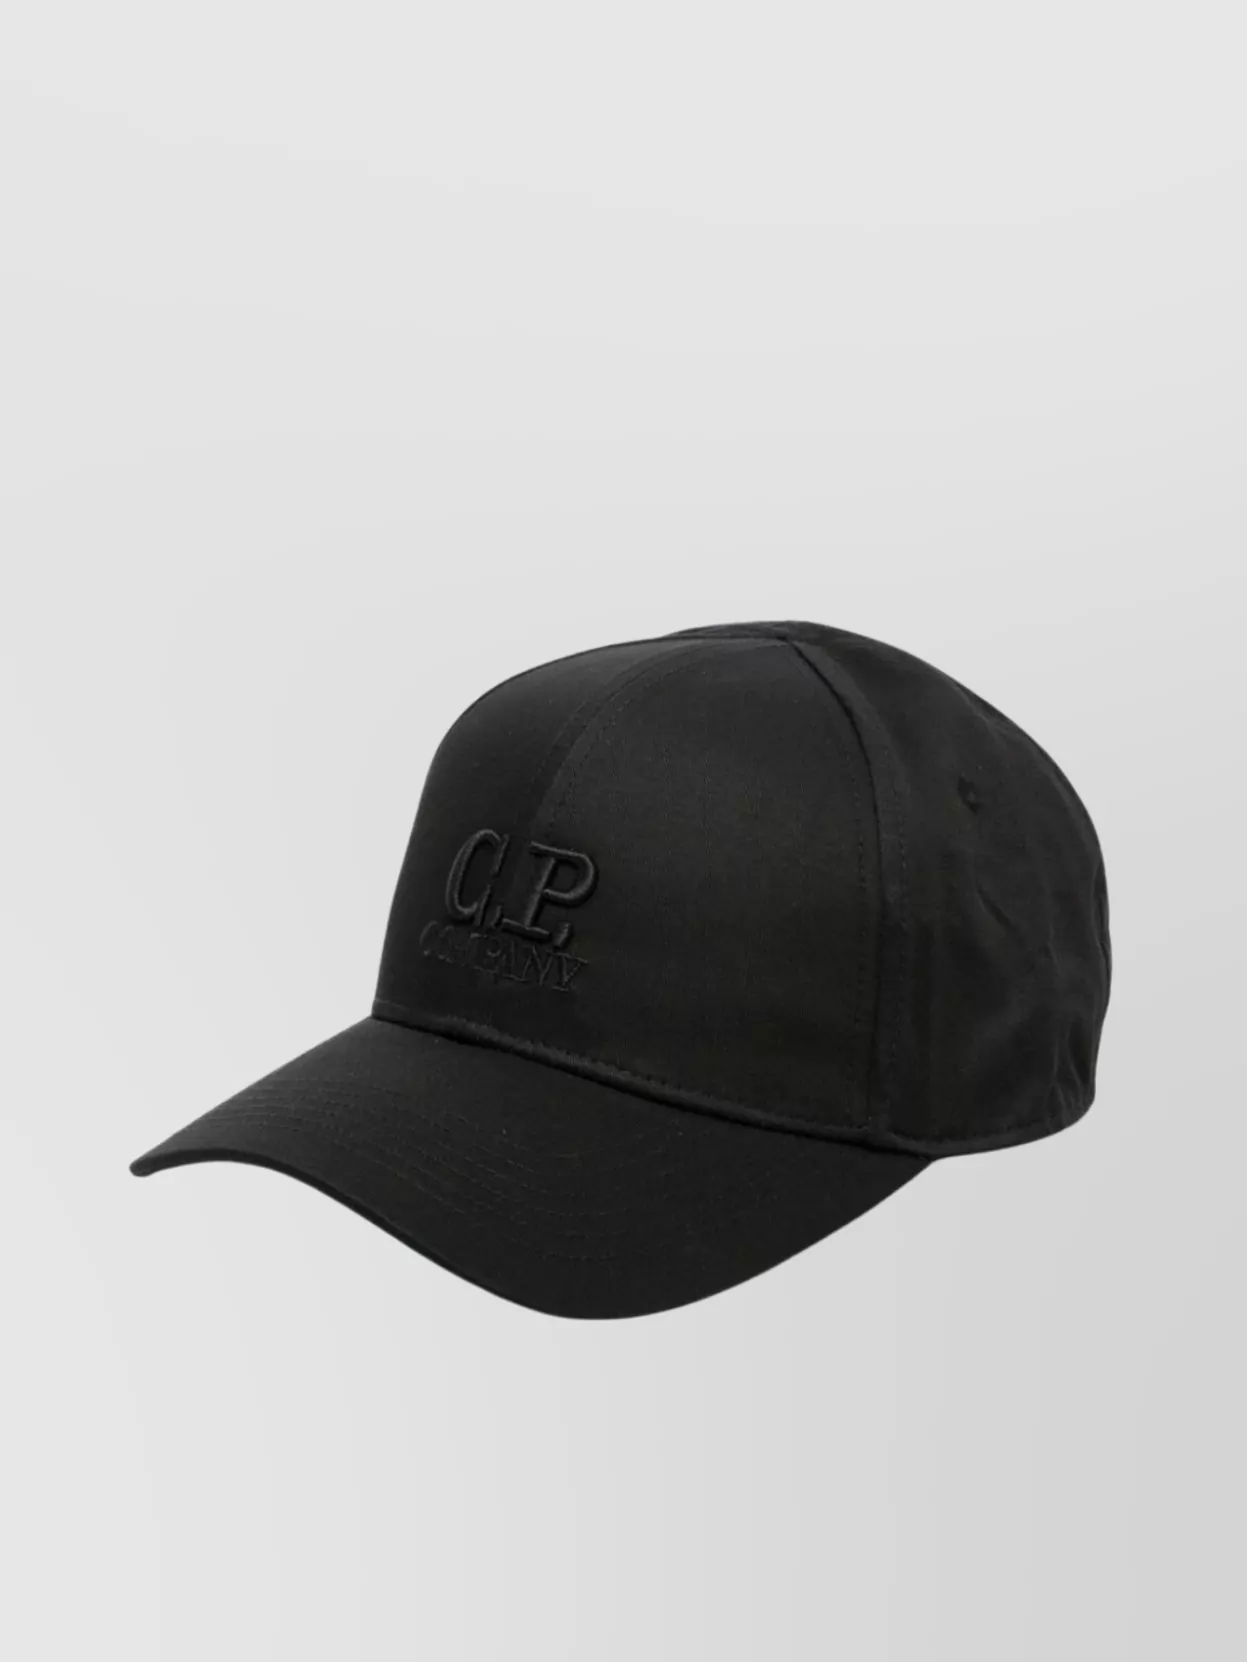 Shop C.p. Company Structured Baseball Cap With Curved Visor And Embroidered Eyelets